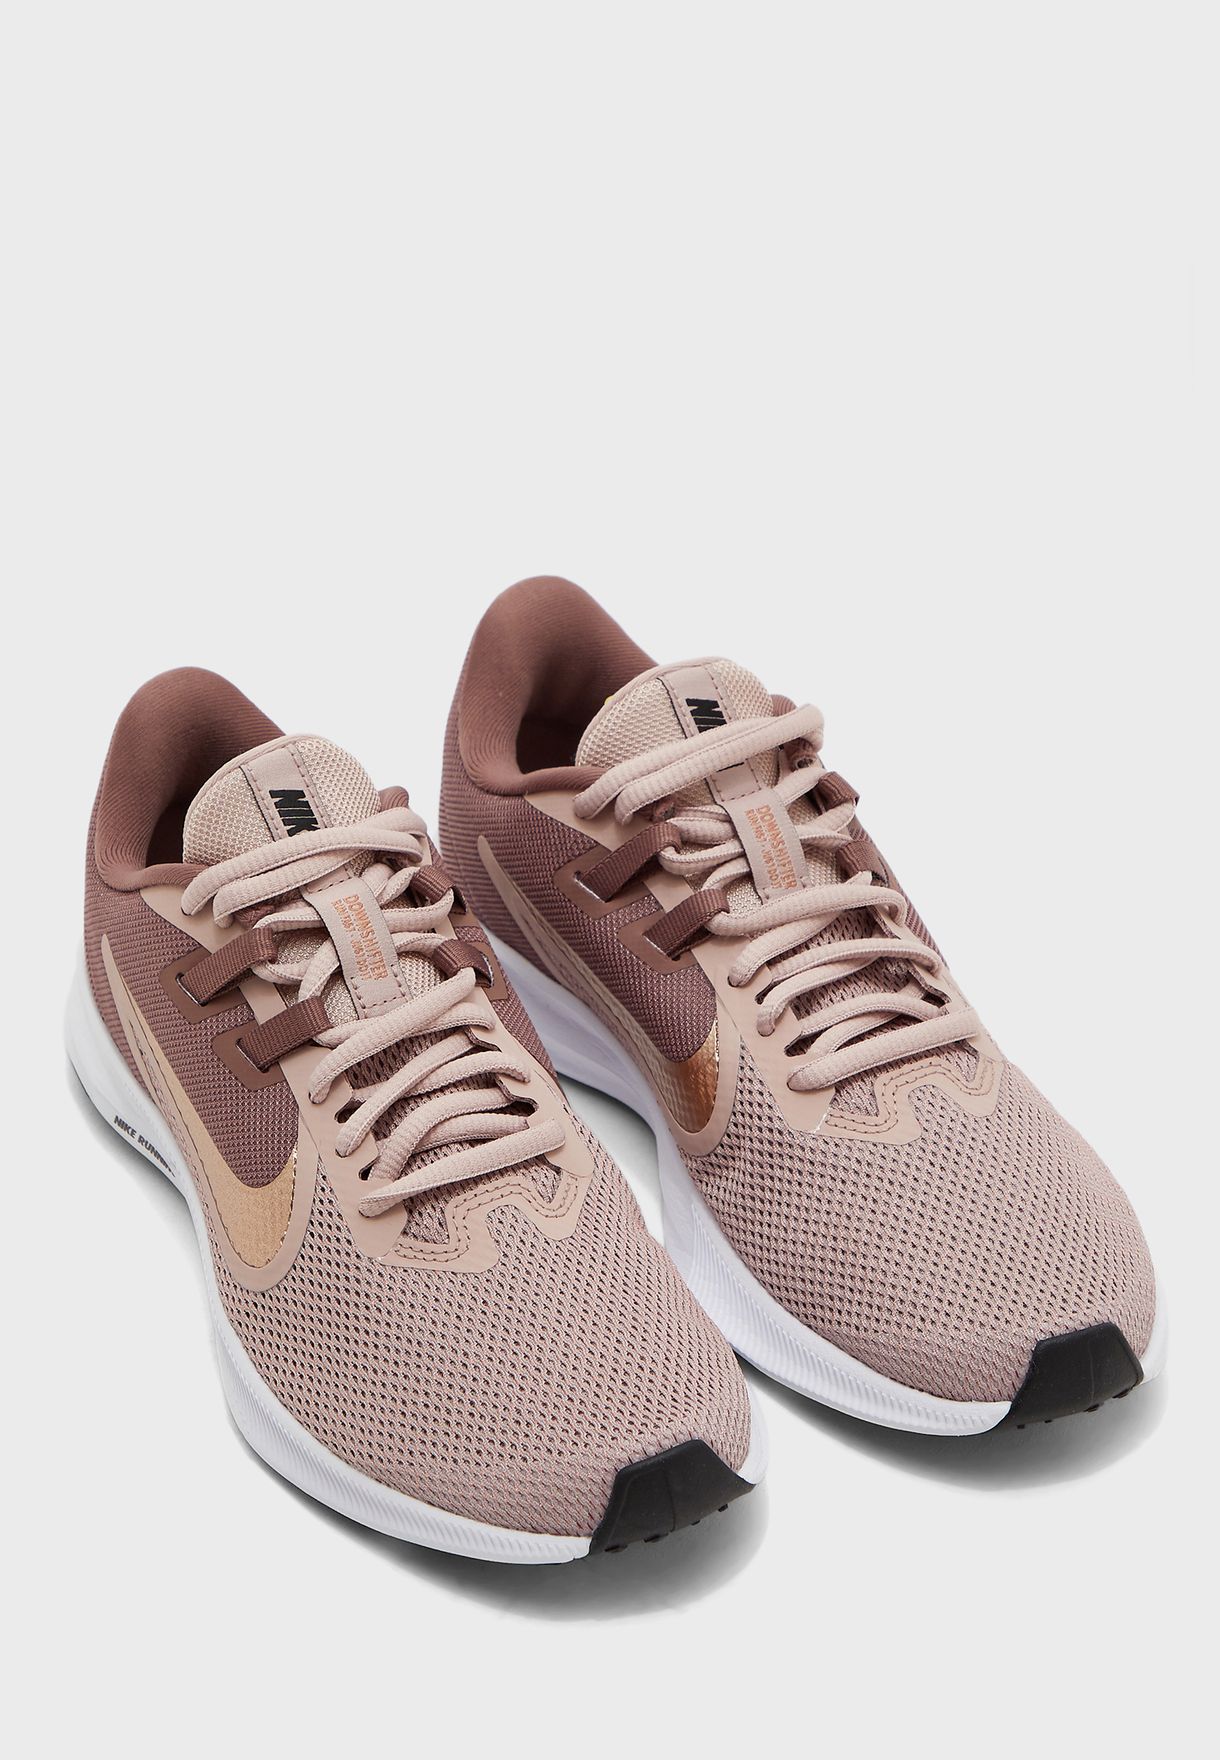 wmns nike downshifter 9